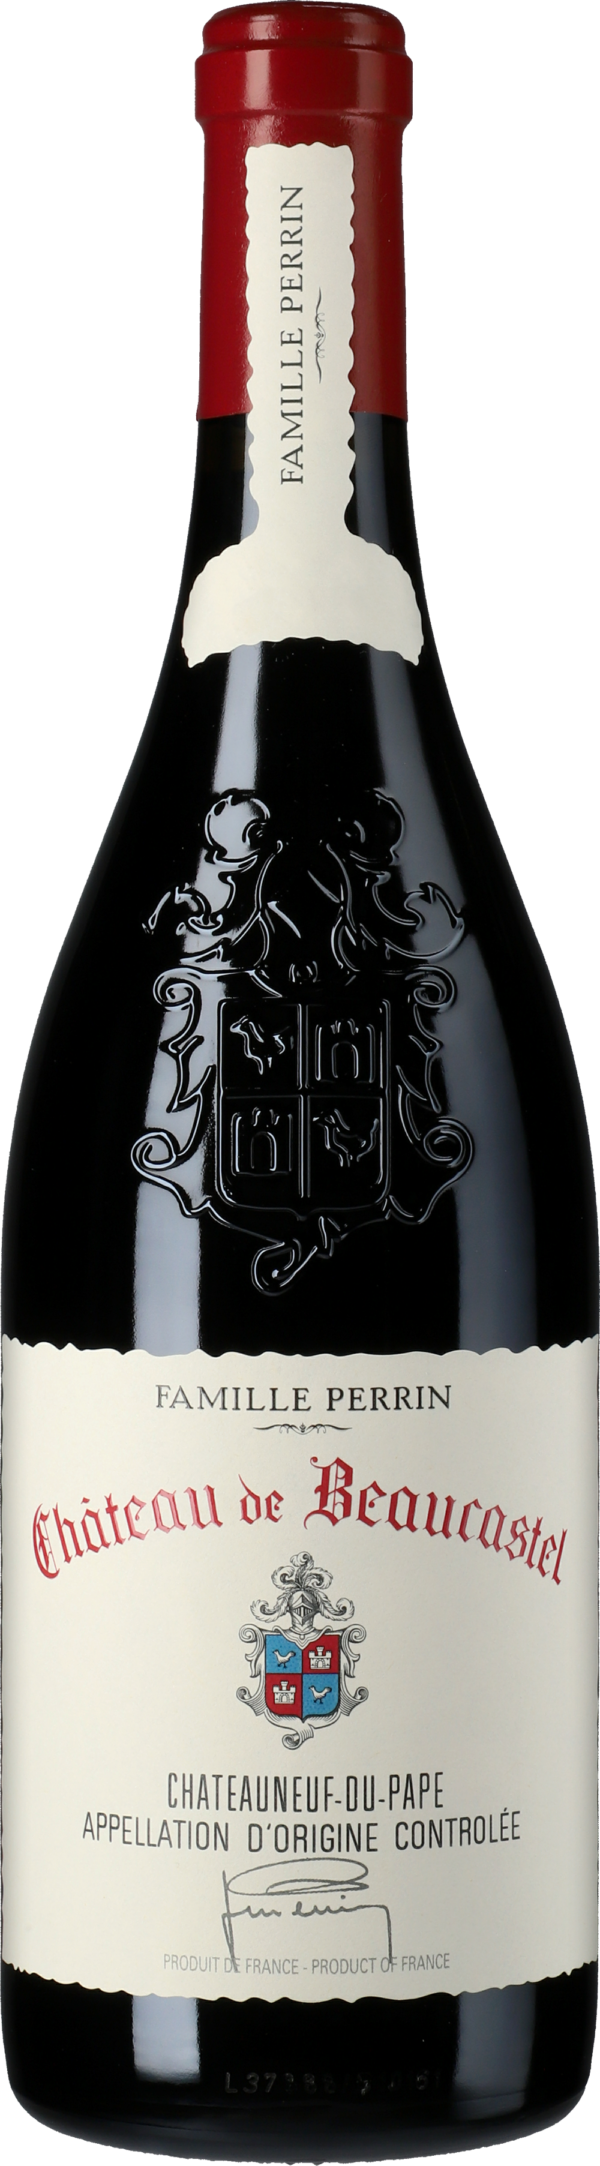 Product image of Chateau de Beaucastel Chateauneuf du Pape 2019 from 8wines